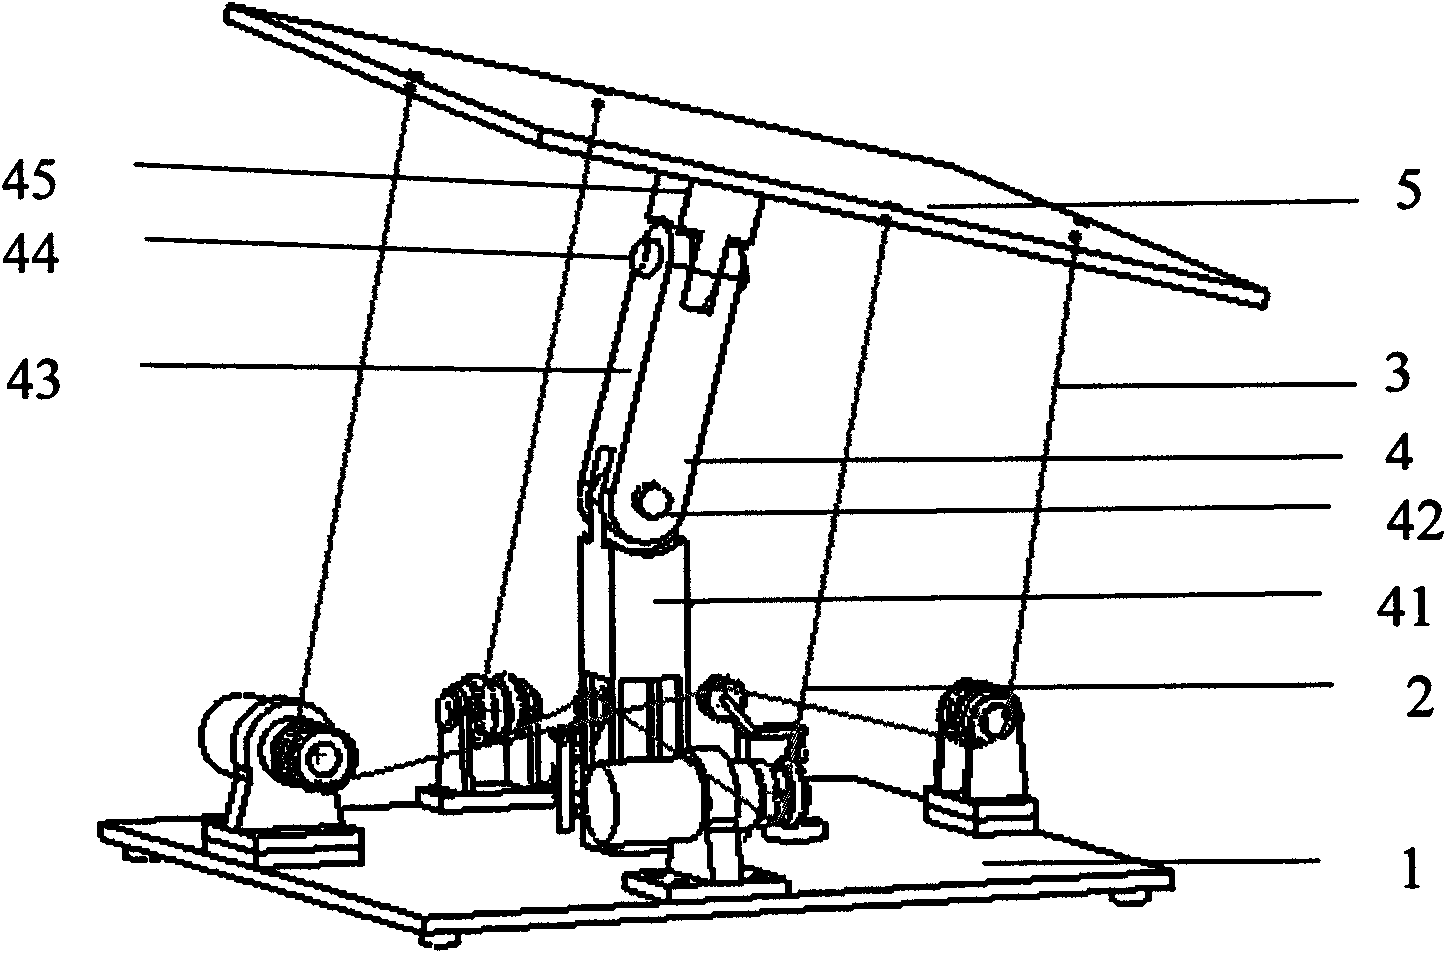 Two-degree freedom rope traction and parallel-connection mechanism